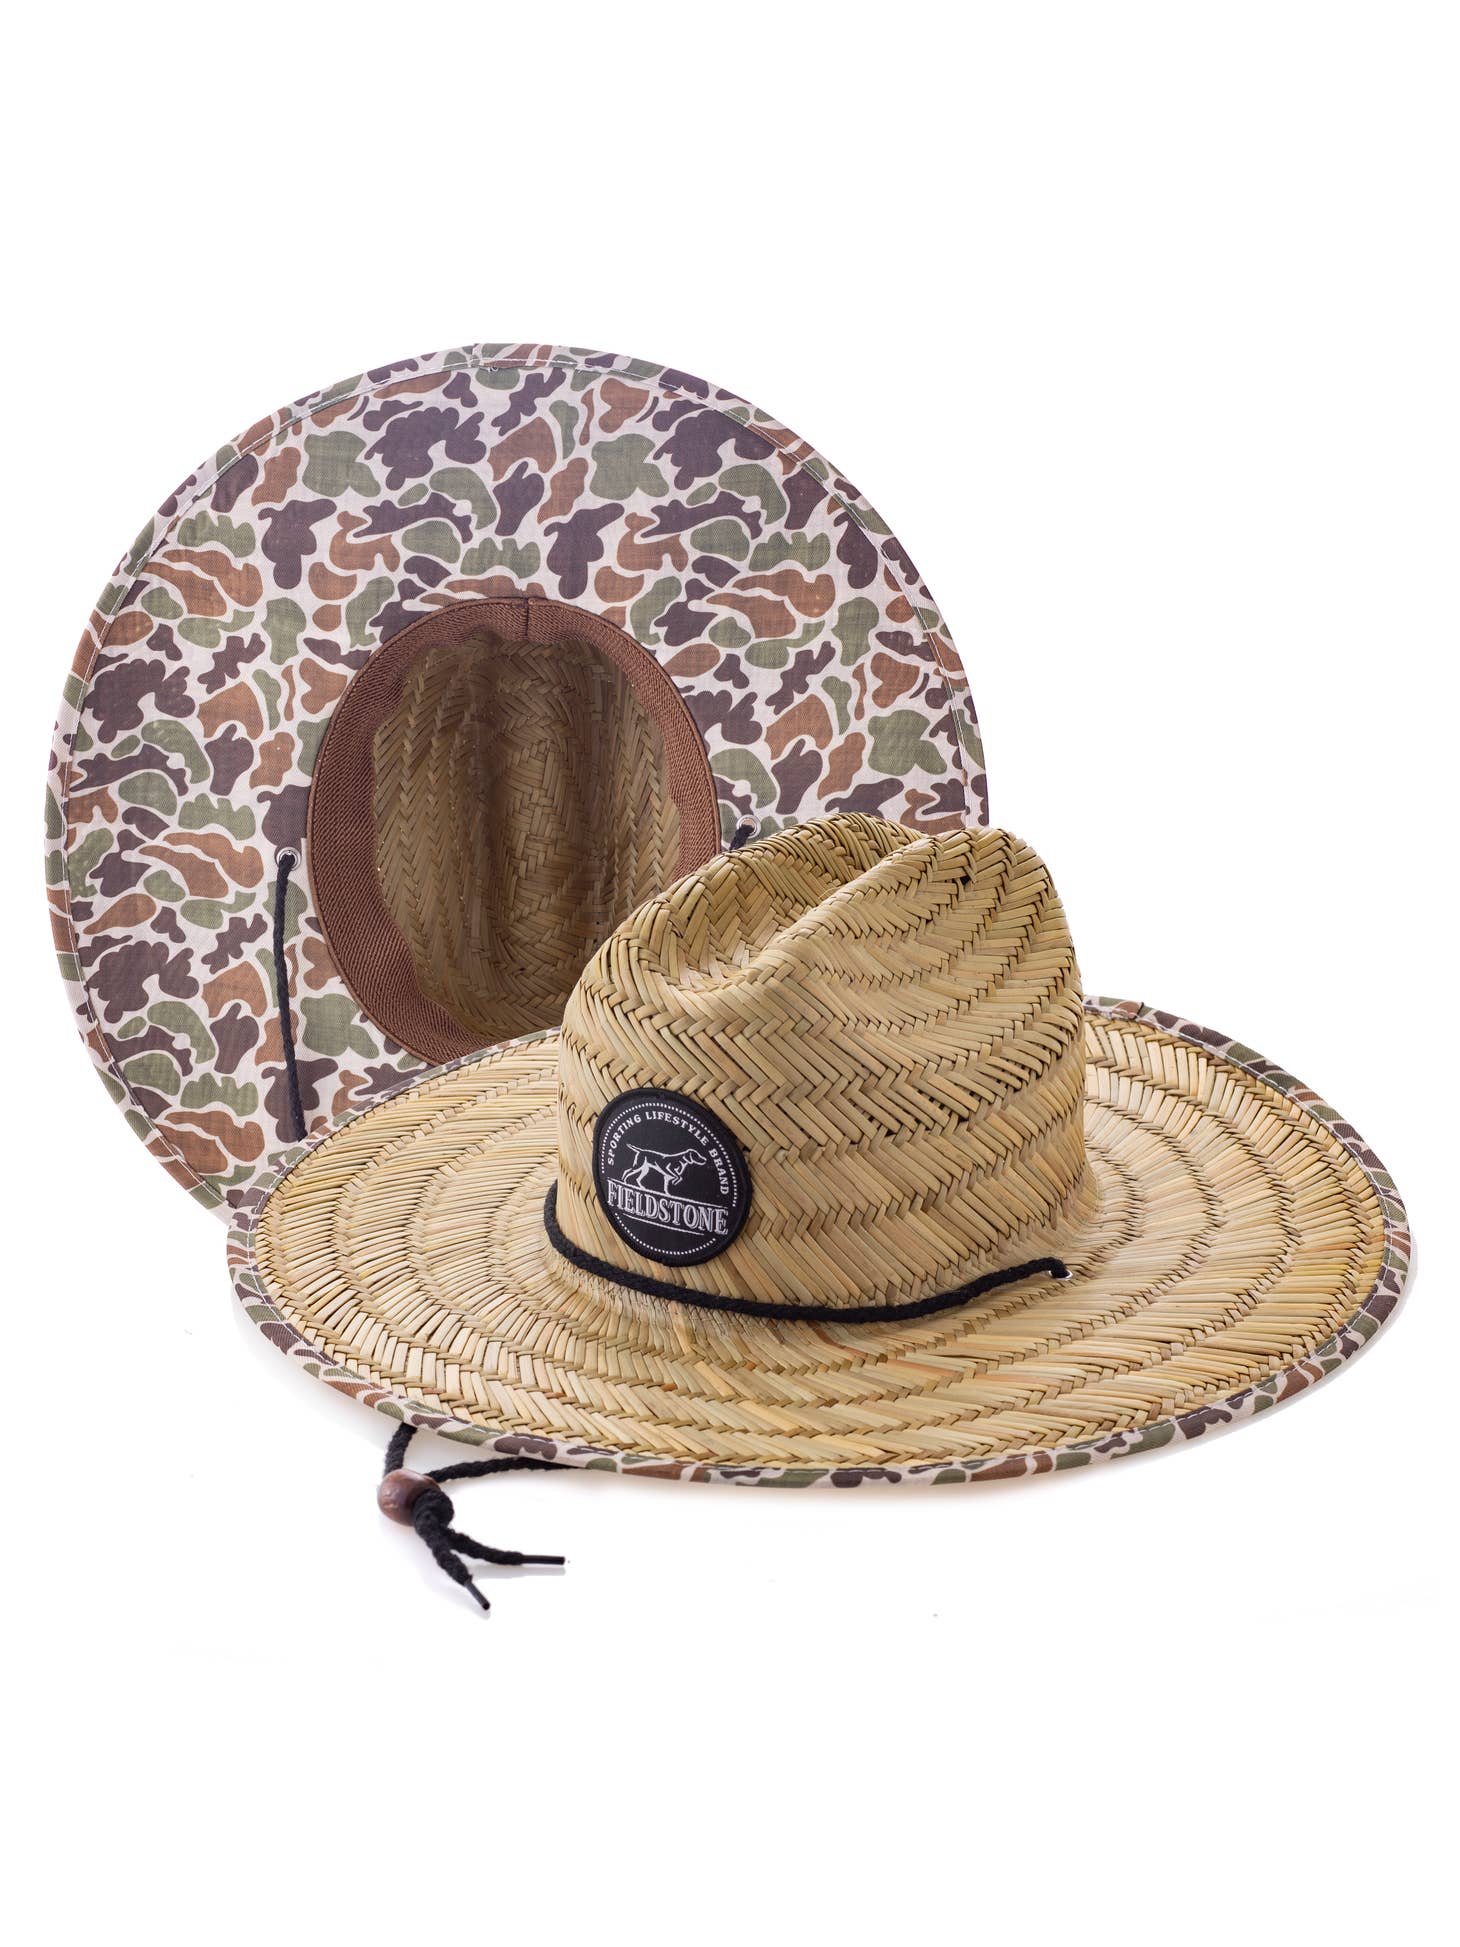 An Adult & Youth Straw Hat by Fieldstone Outdoor Provisions Co. and a plate on a white background.